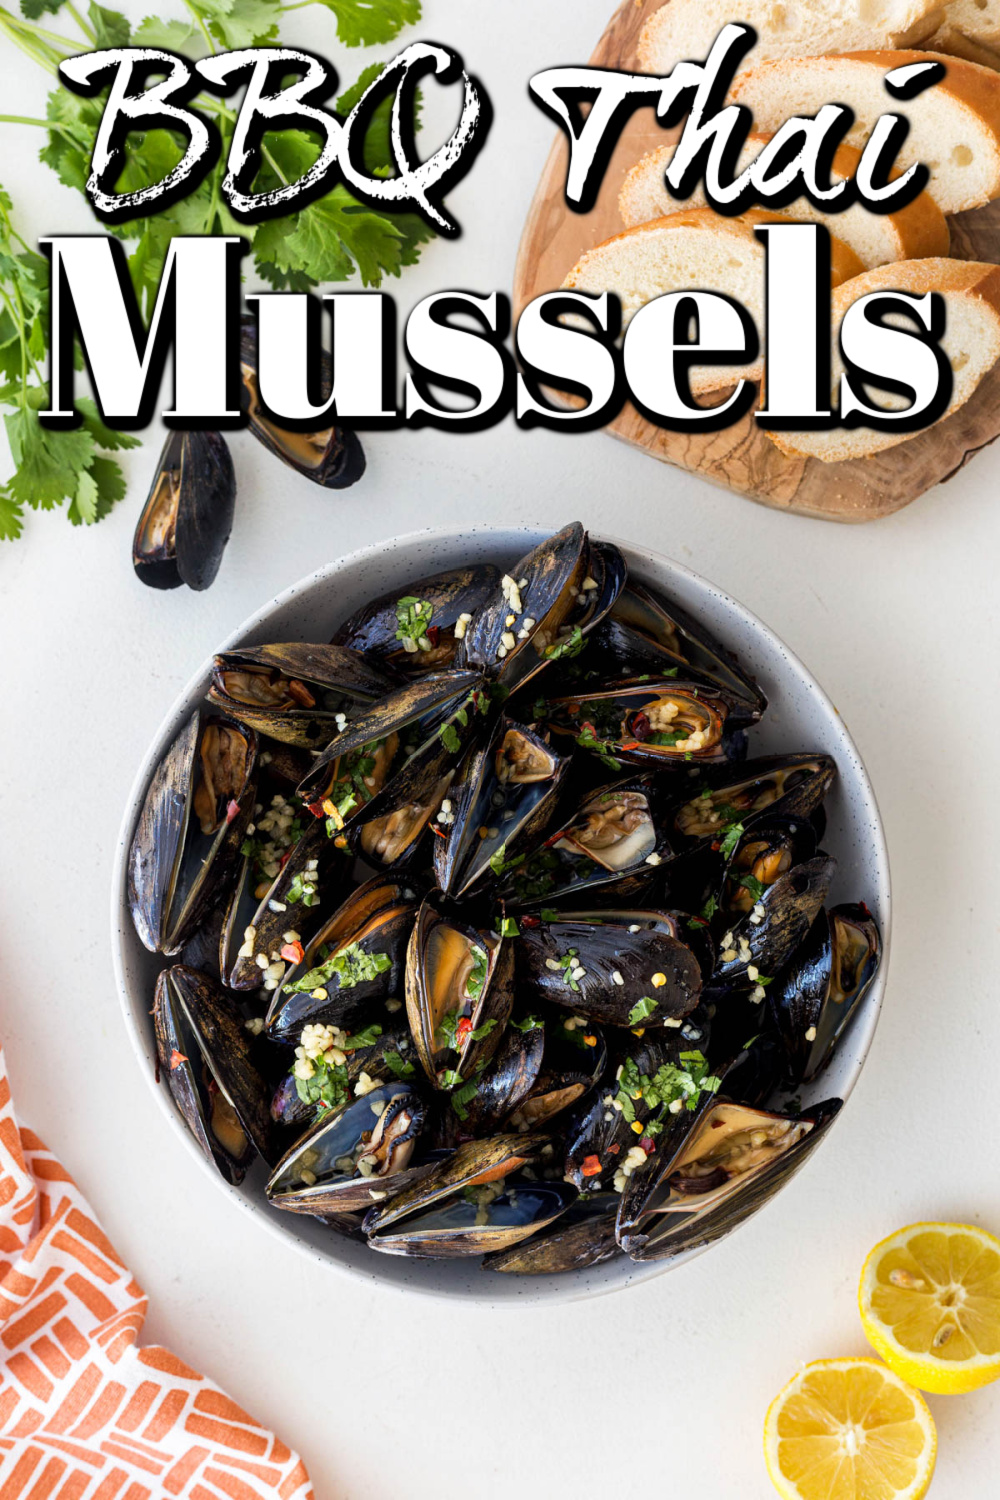 In about 10 minutes you can have amazing BBQ Thai mussels on the table; what could be easier than that?